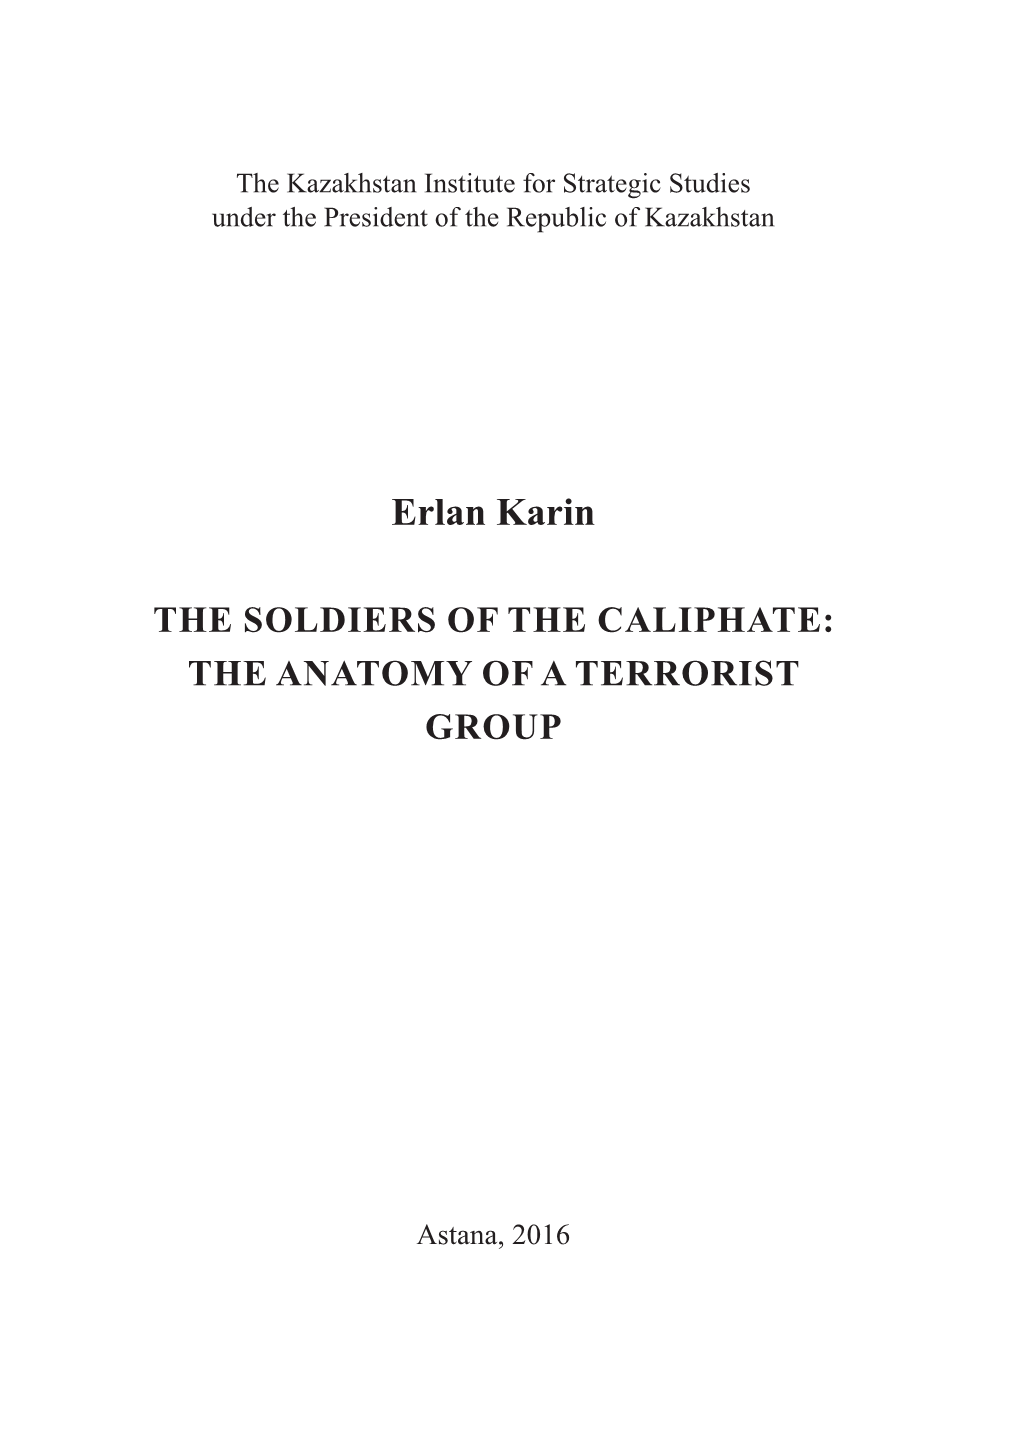 Erlan Karin the SOLDIERS of the CALIPHATE